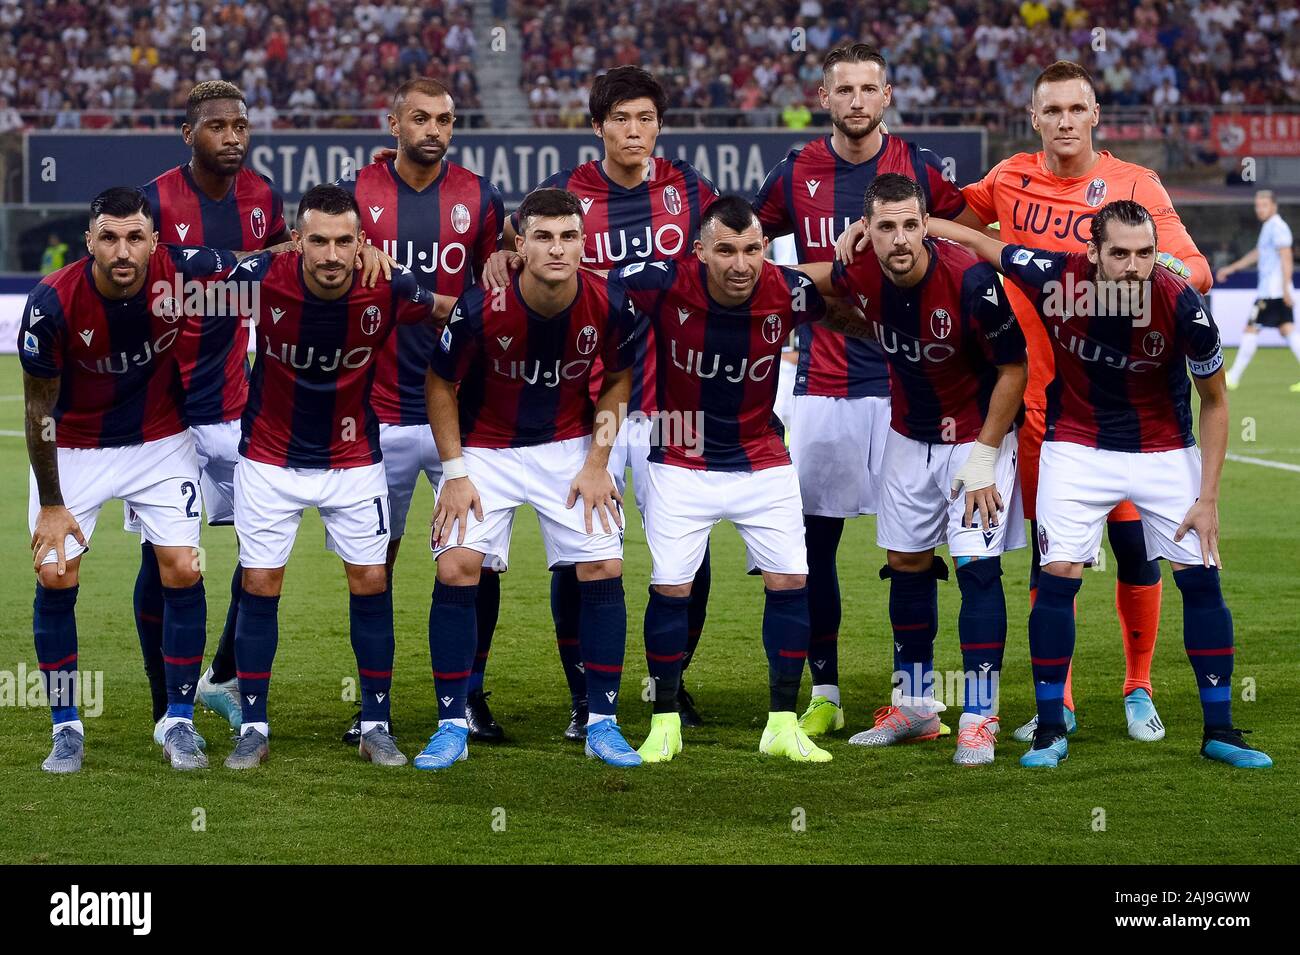 Bologna, Italy. 30 August, 2019: Players of Bologna FC pose for a team photo prior to the Serie A football match between Bologna FC and SPAL. Bologna FC won 1-0 over SPAL. Credit: Nicolò Campo/Alamy News Stock Photo